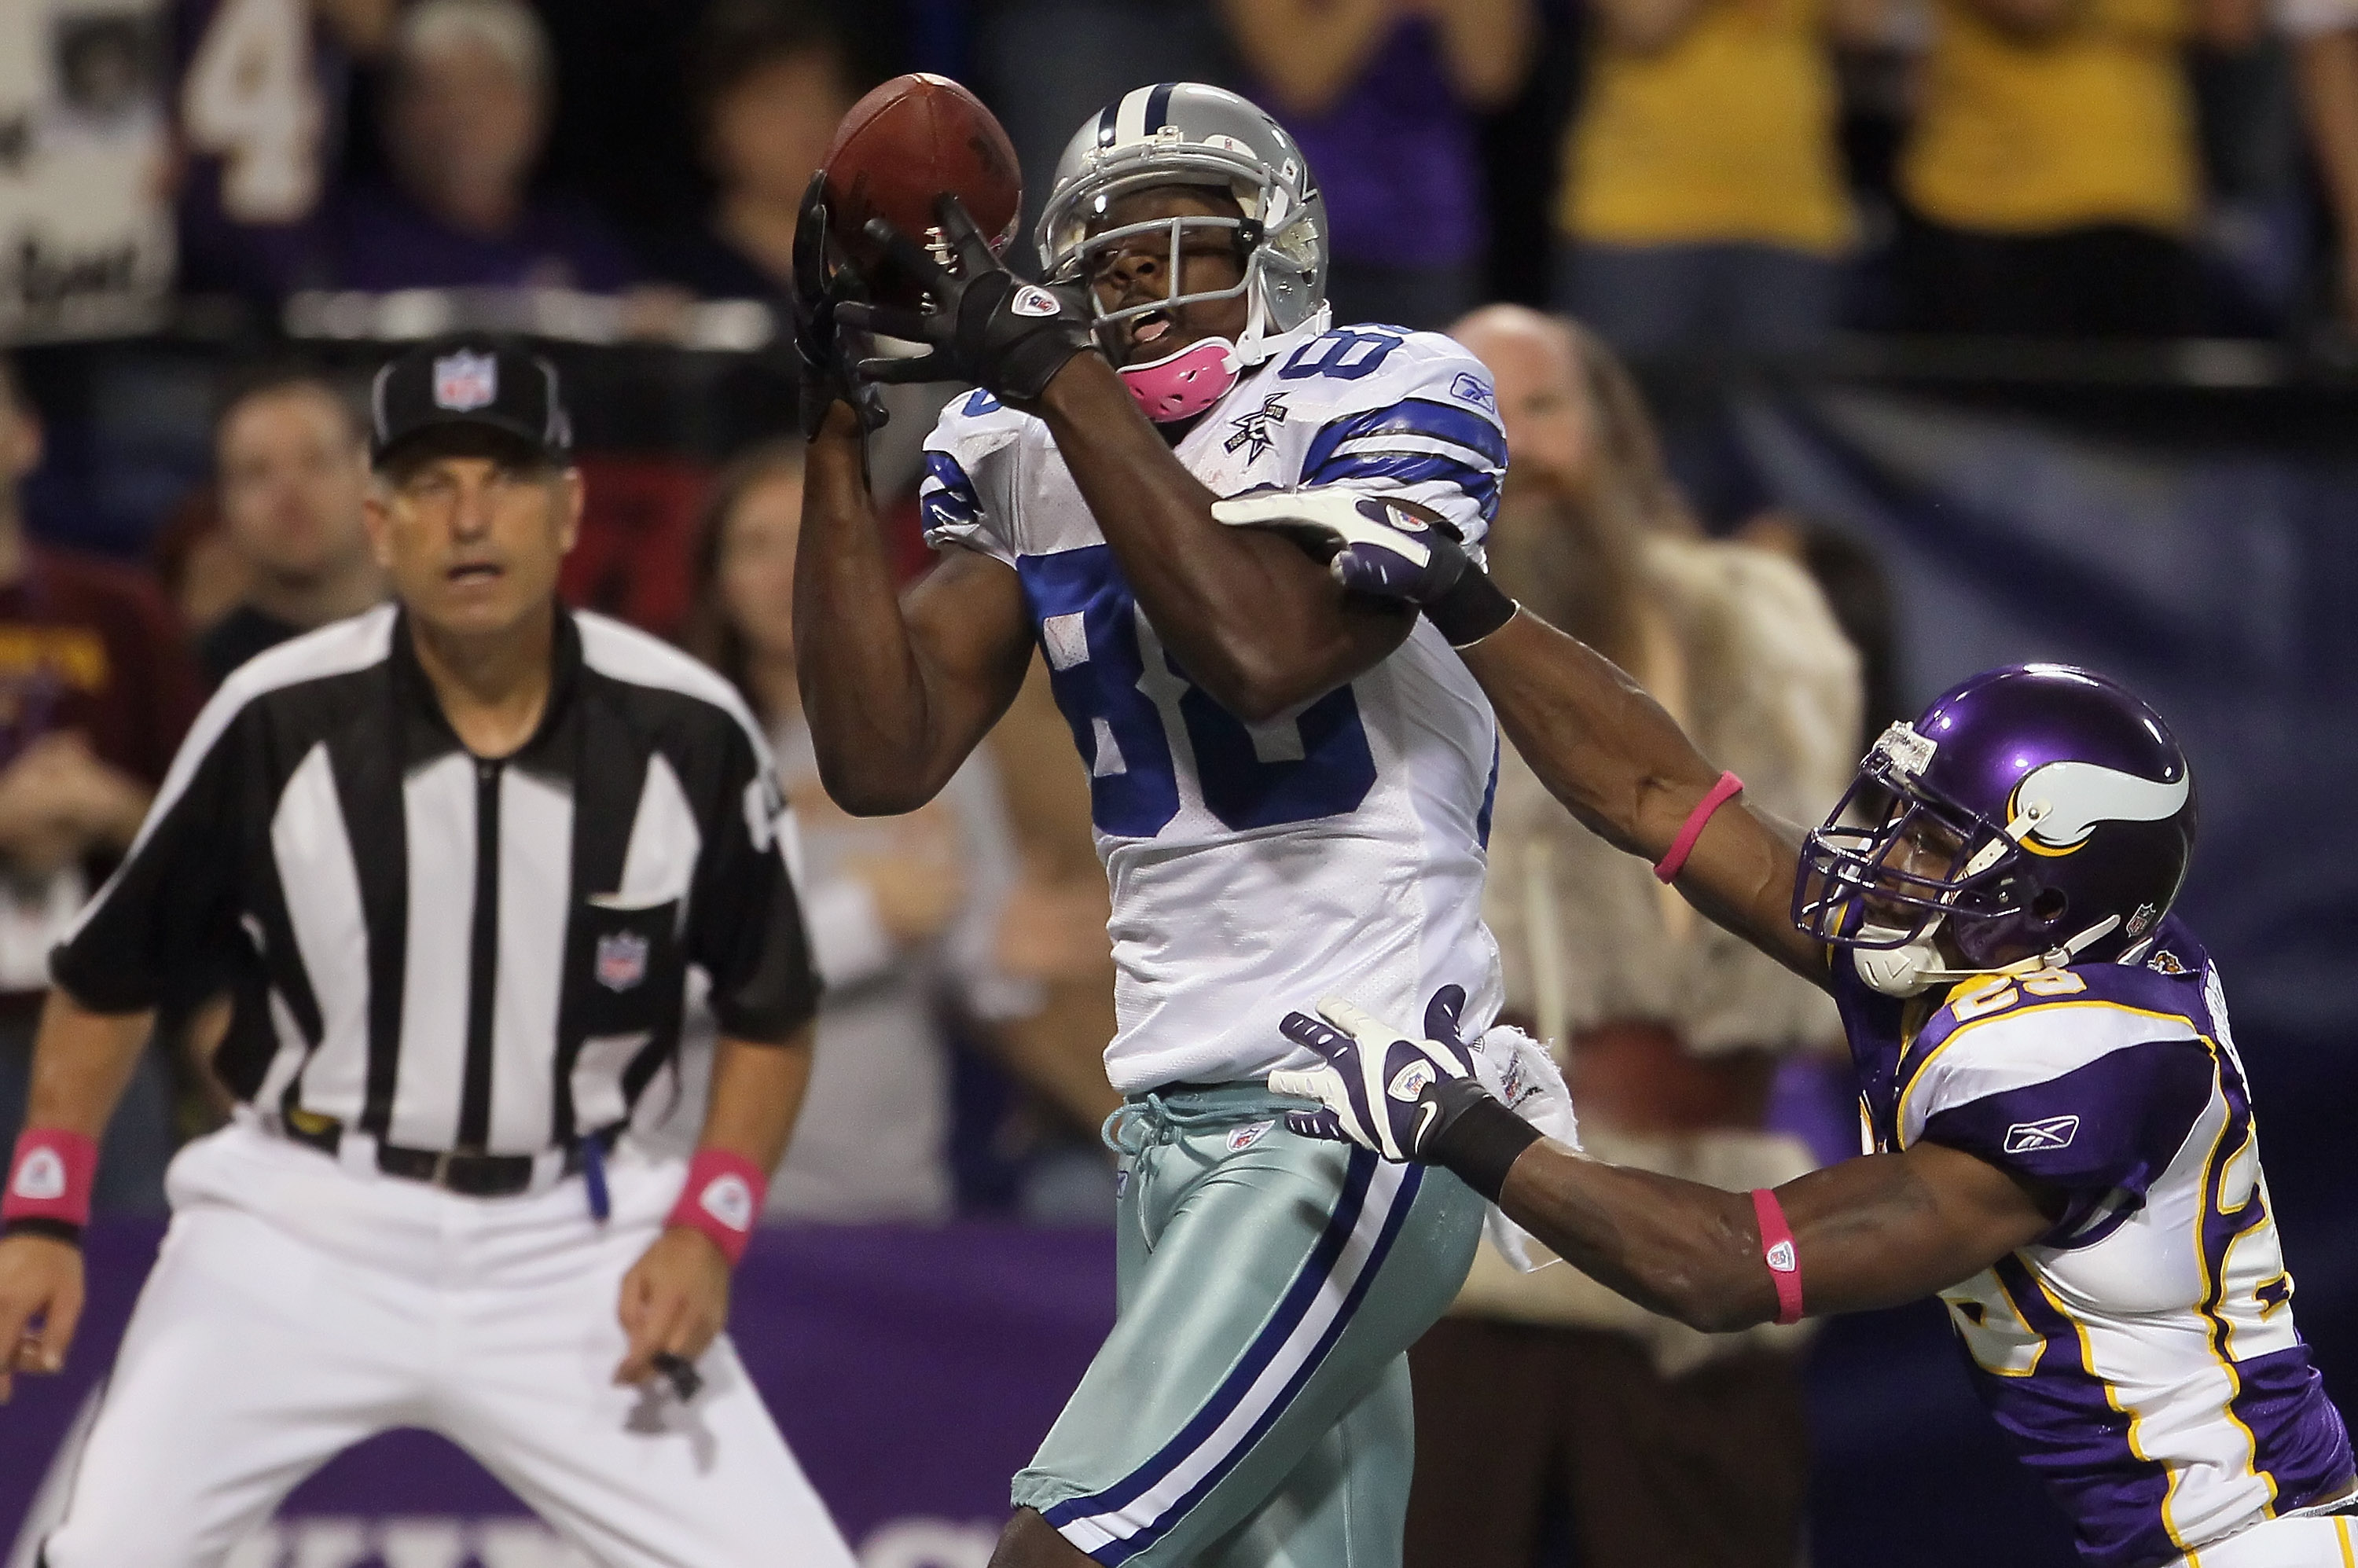 MINNEAPOLIS - OCTOBER 17:  Wide receiver Dez Bryant #88 of the Dallas Cowboys catches a pass for a touchdown as Lito Sheppard #29 of the Minnesota Vikings misses the tackle during the fourth quarter at Mall of America Field on October 17, 2010 in Minneapo